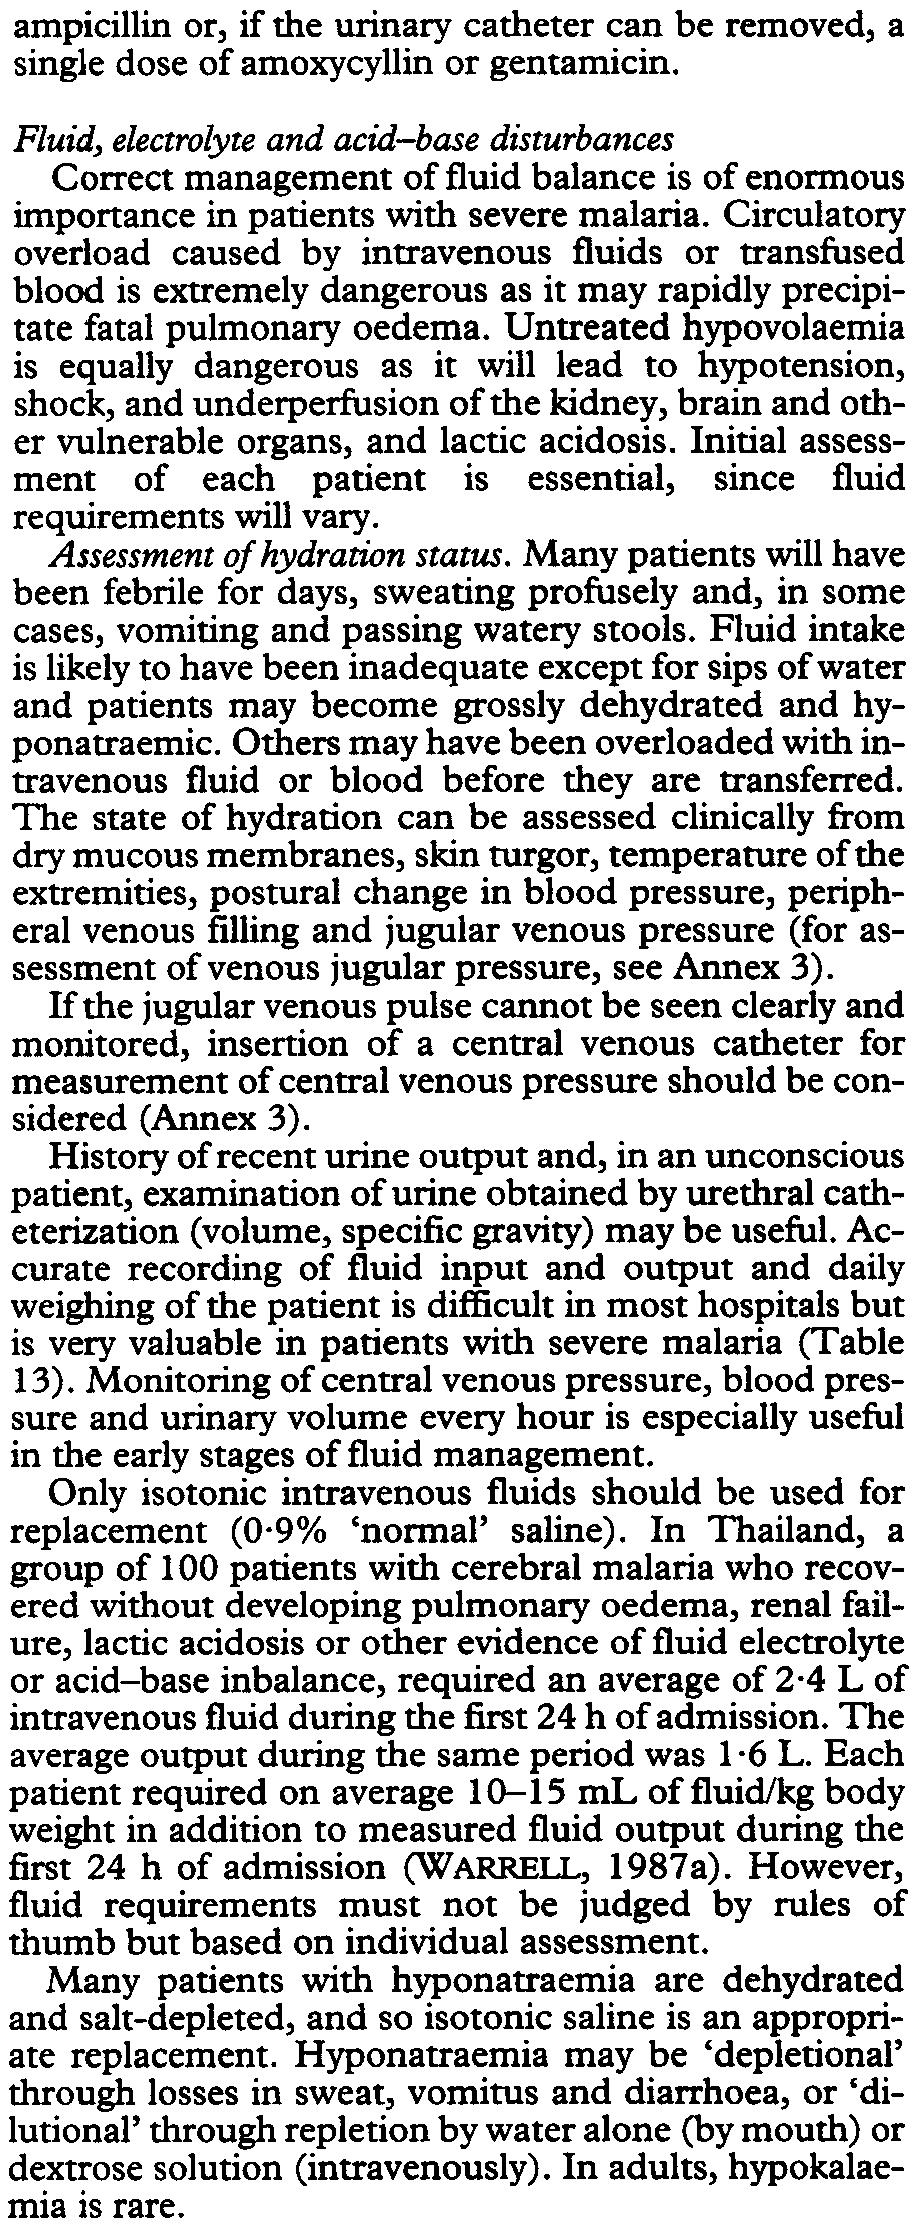 Positive pressure ventilation with PEEP/CPAP (positive and expiratory pressure/continuous positive airway pressure) will usually result in adequ*e oxygenation until diuresis can be initiated or the